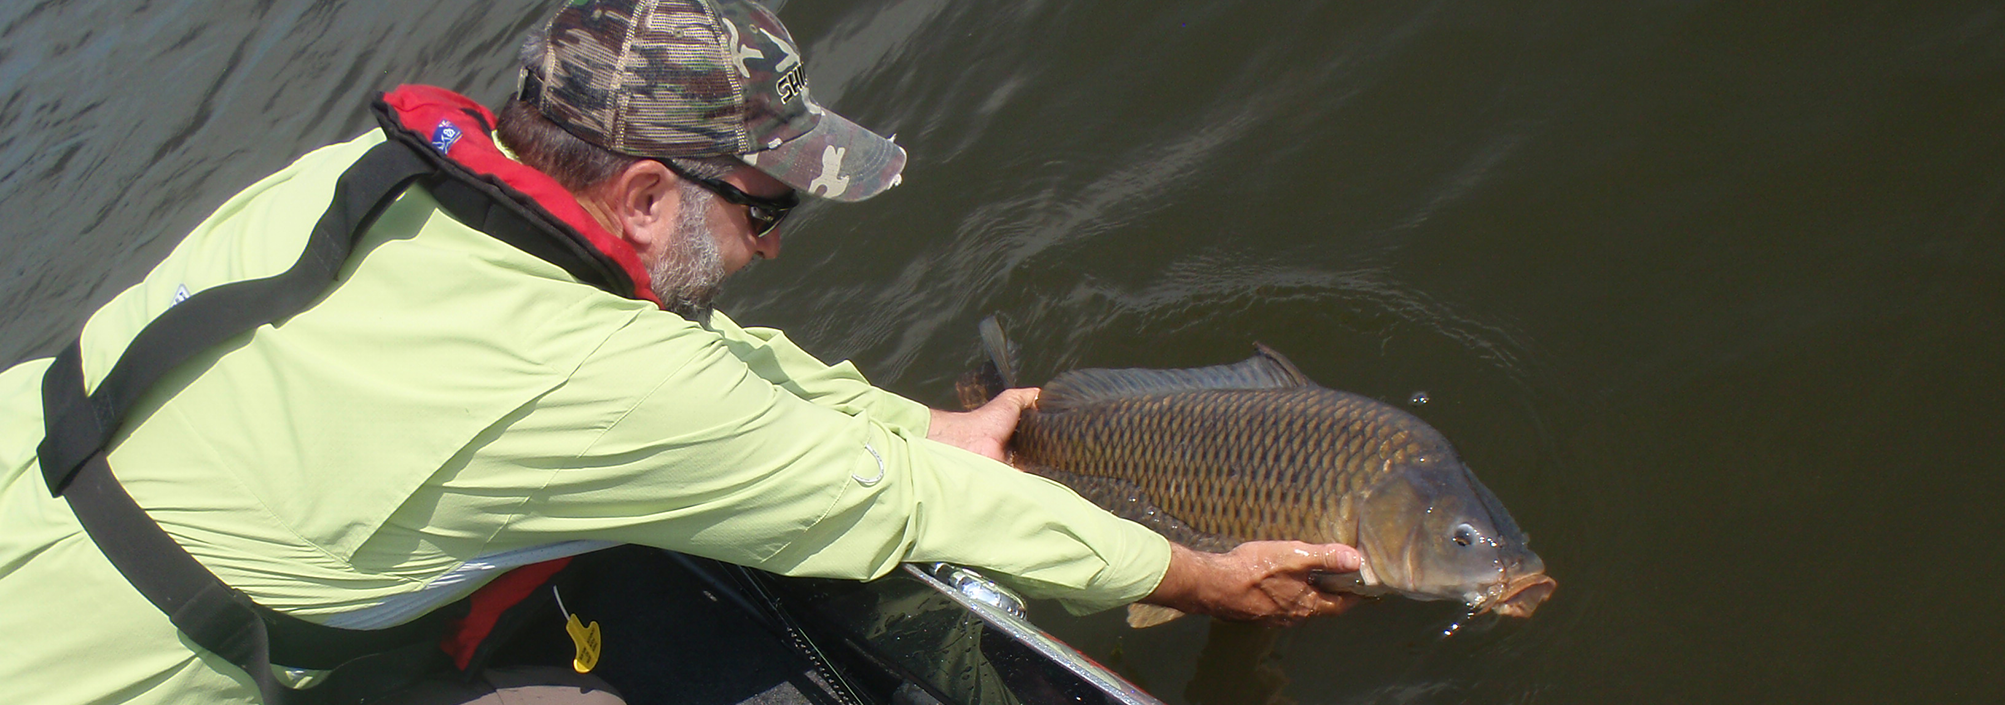 Lawrence releasing a carp